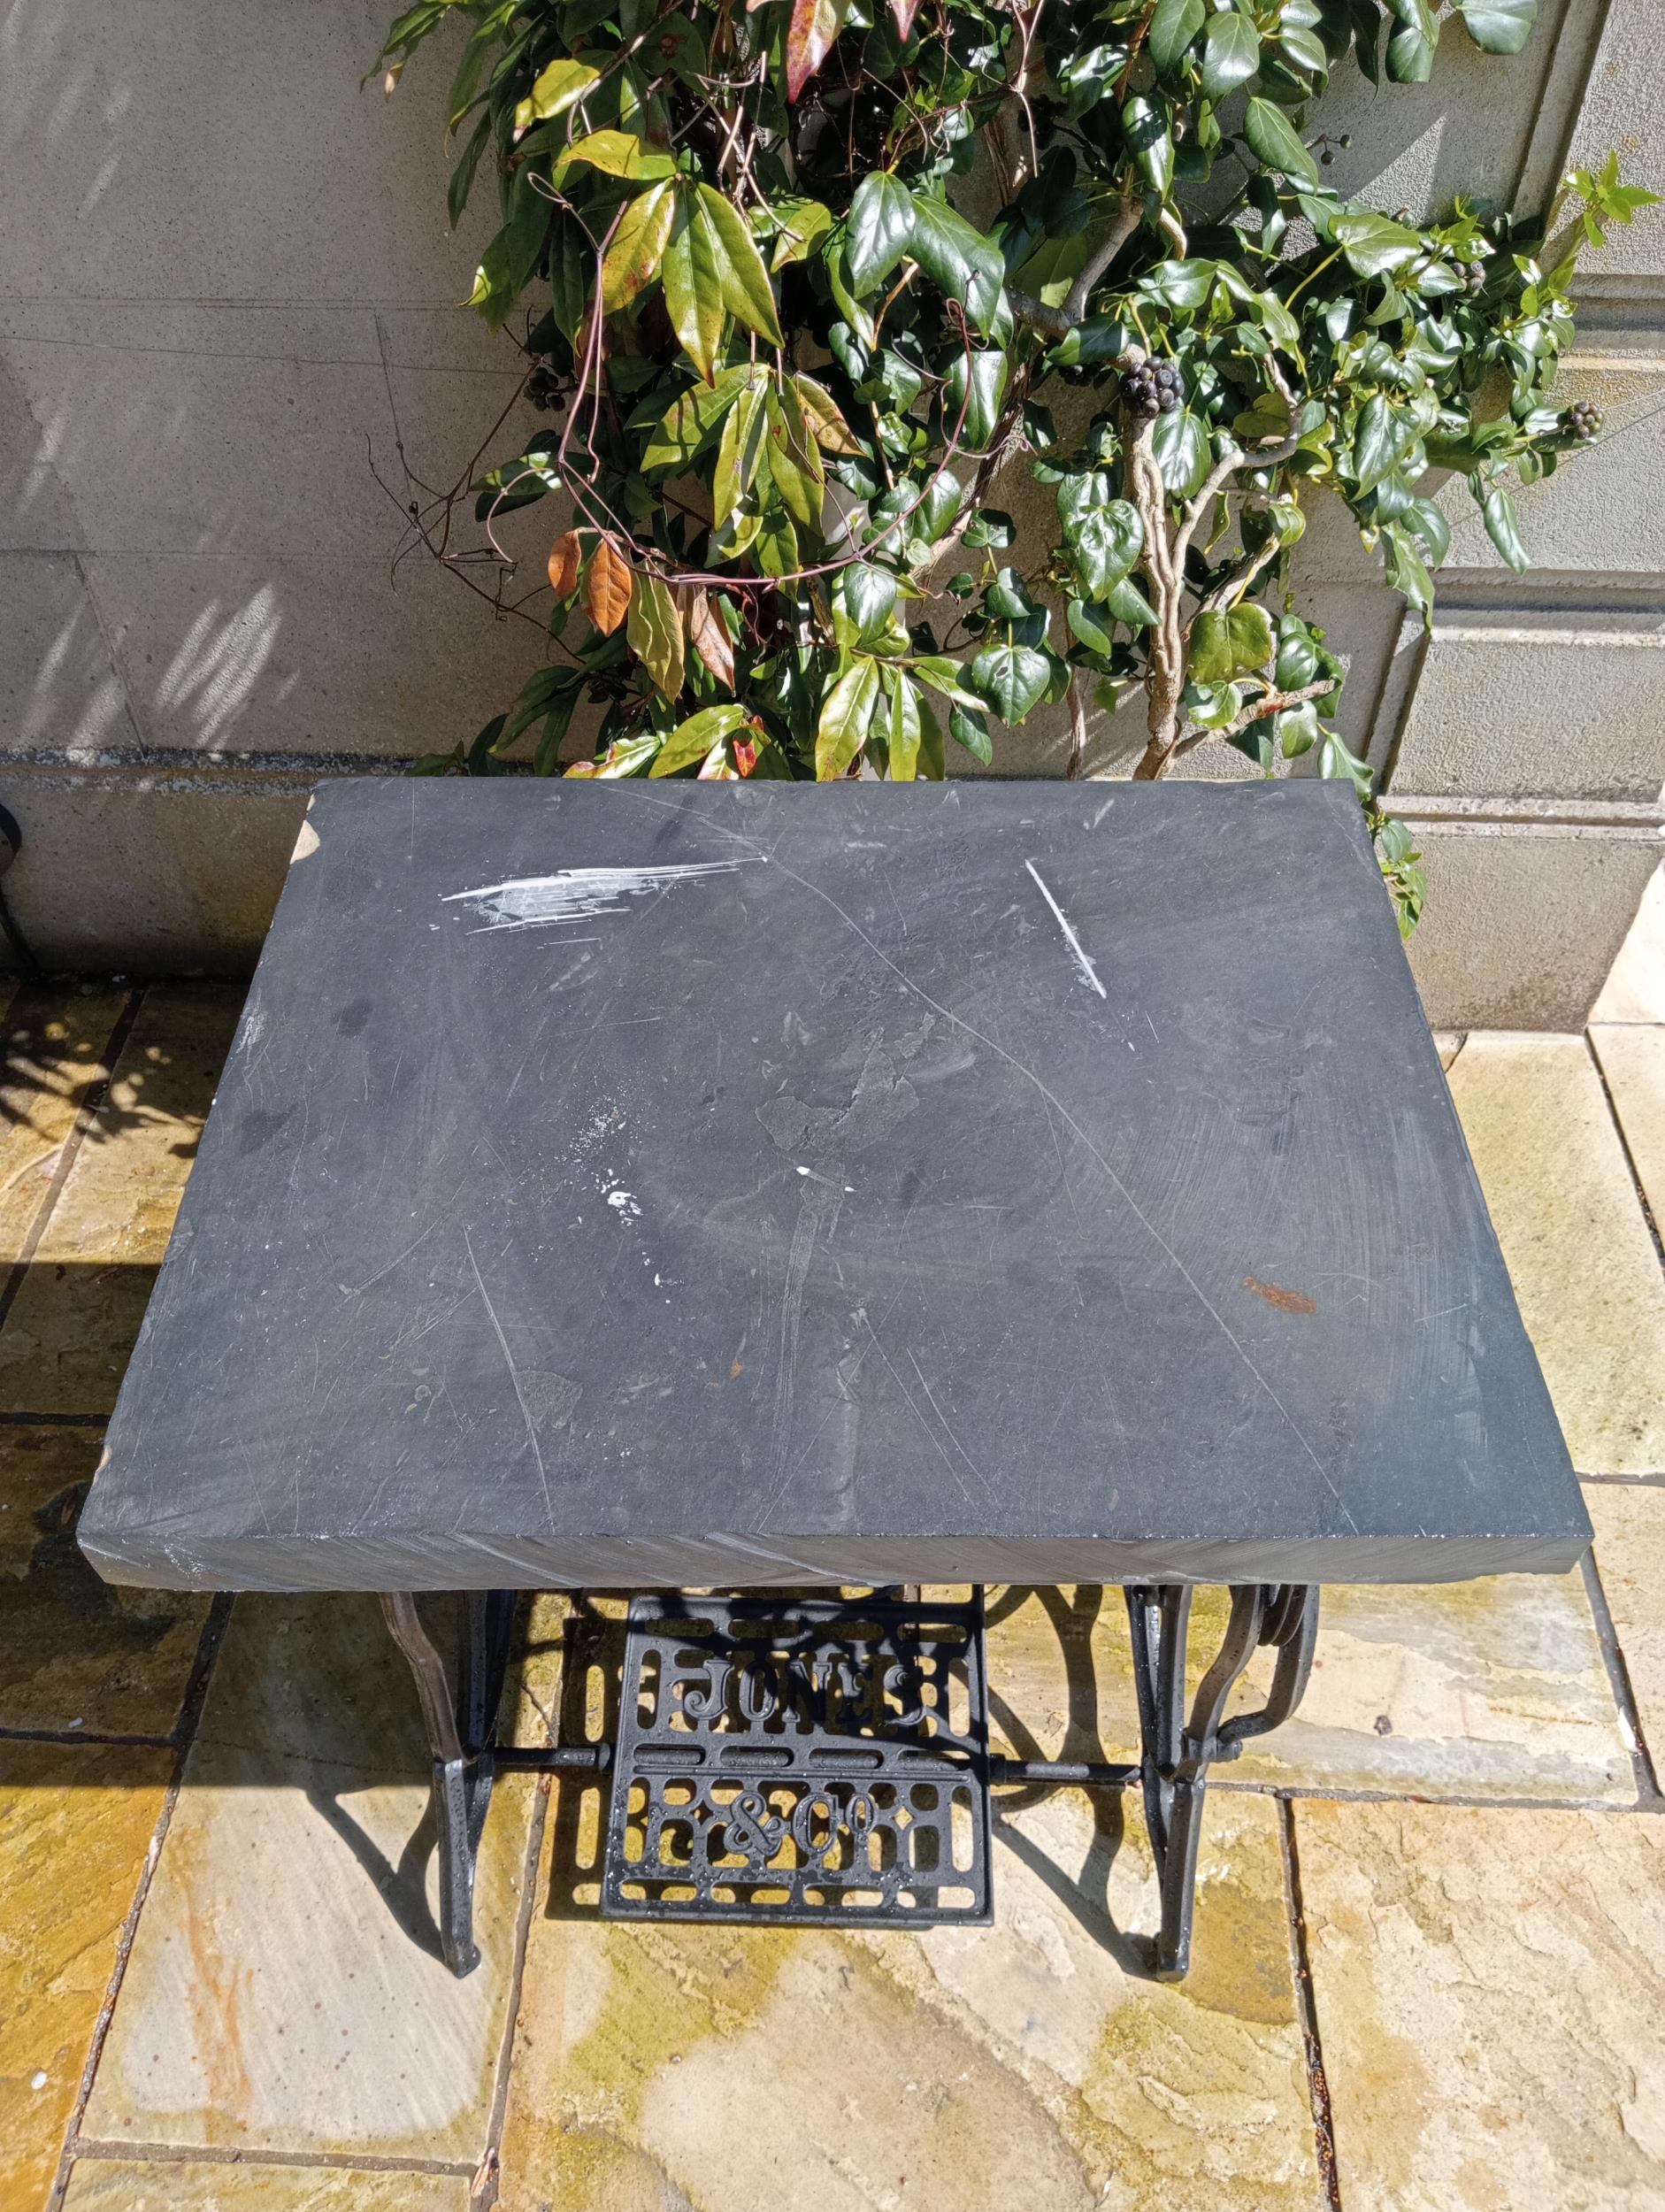 Cast iron sewing base with slate top {H 77cm x W 66cm x D 54cm}. (NOT AVAILABLE TO VIEW IN PERSON) - Image 2 of 2